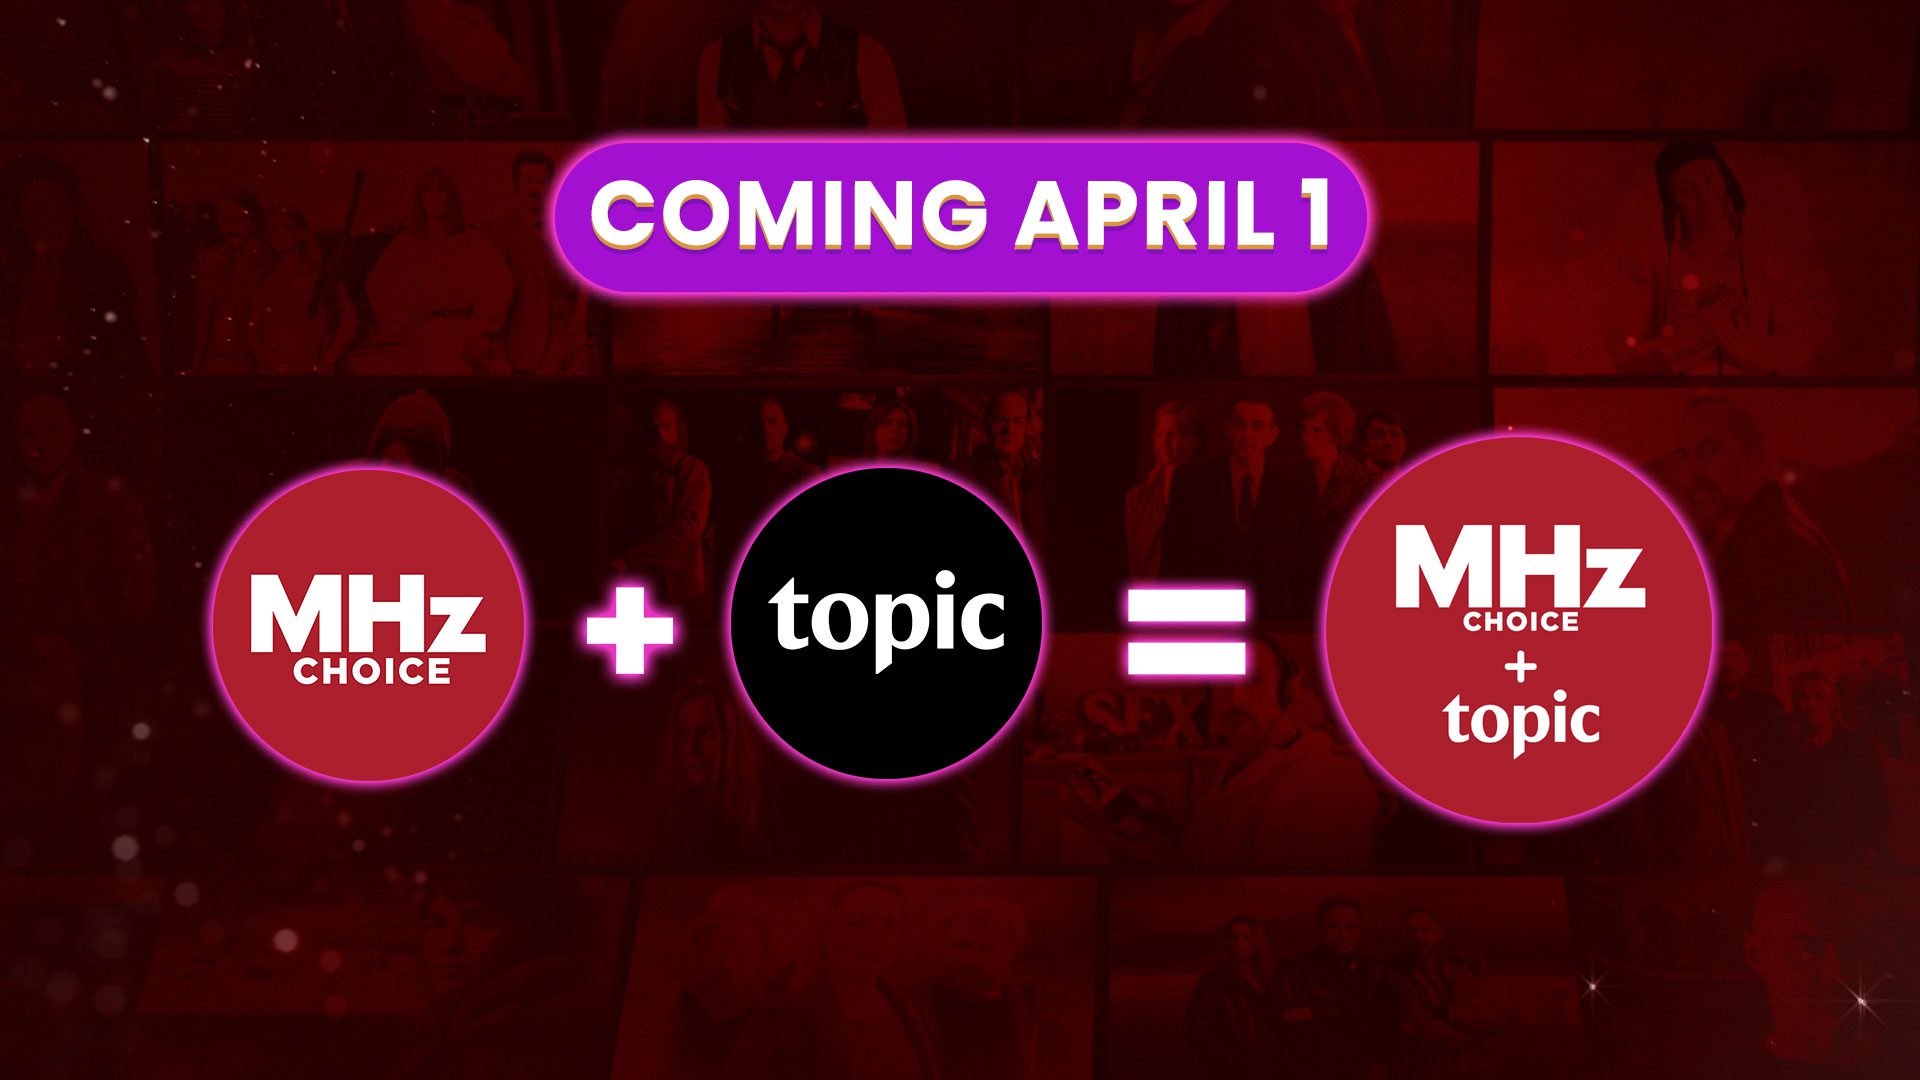 mhz choice topic equals mhz choice plus topic coming april 1